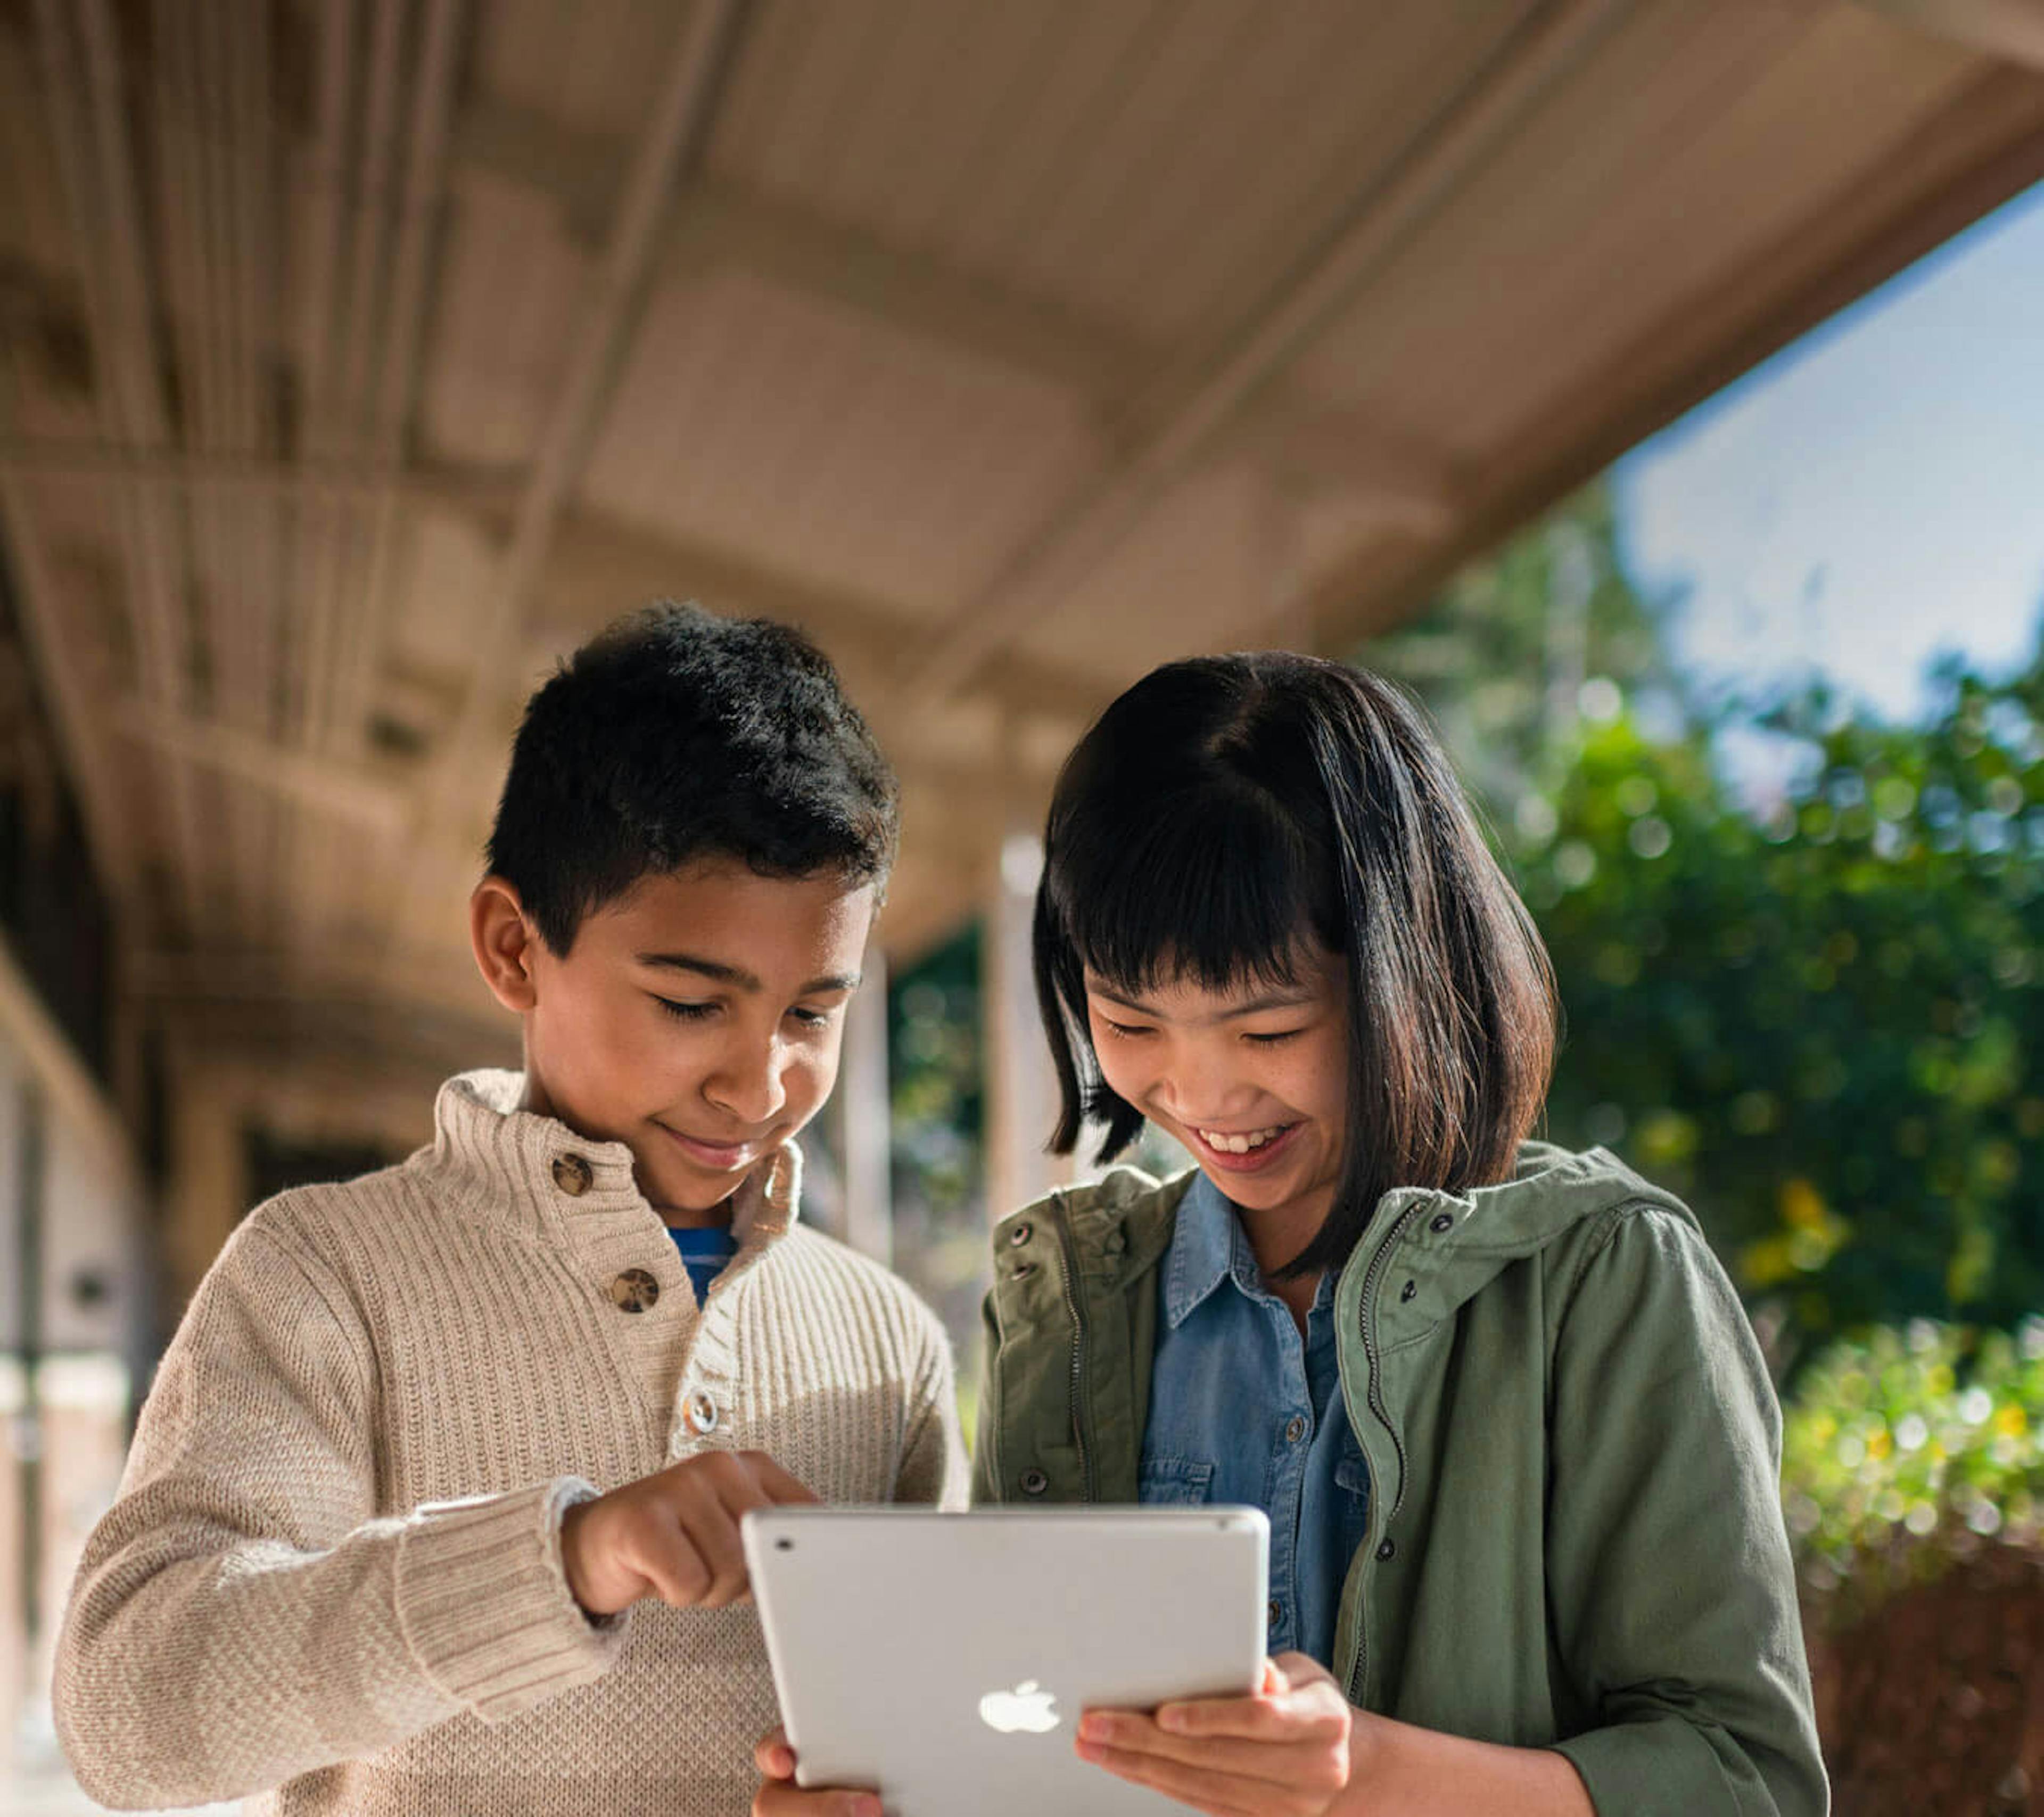 two young kids looking at their ipad outdoors